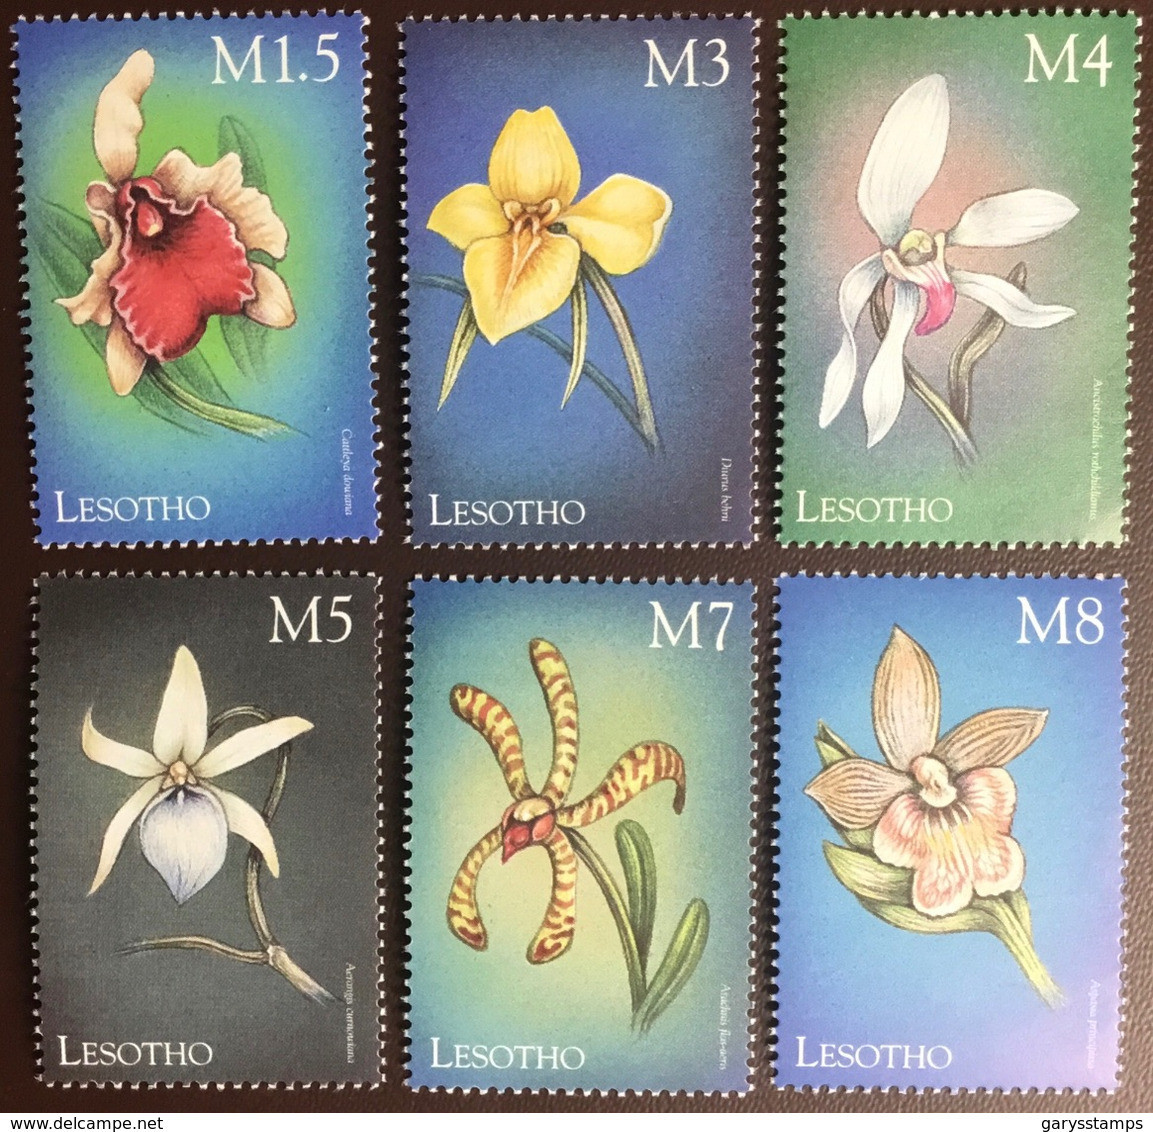 Lesotho 1999 Orchids Flowers MNH - Orchideeën